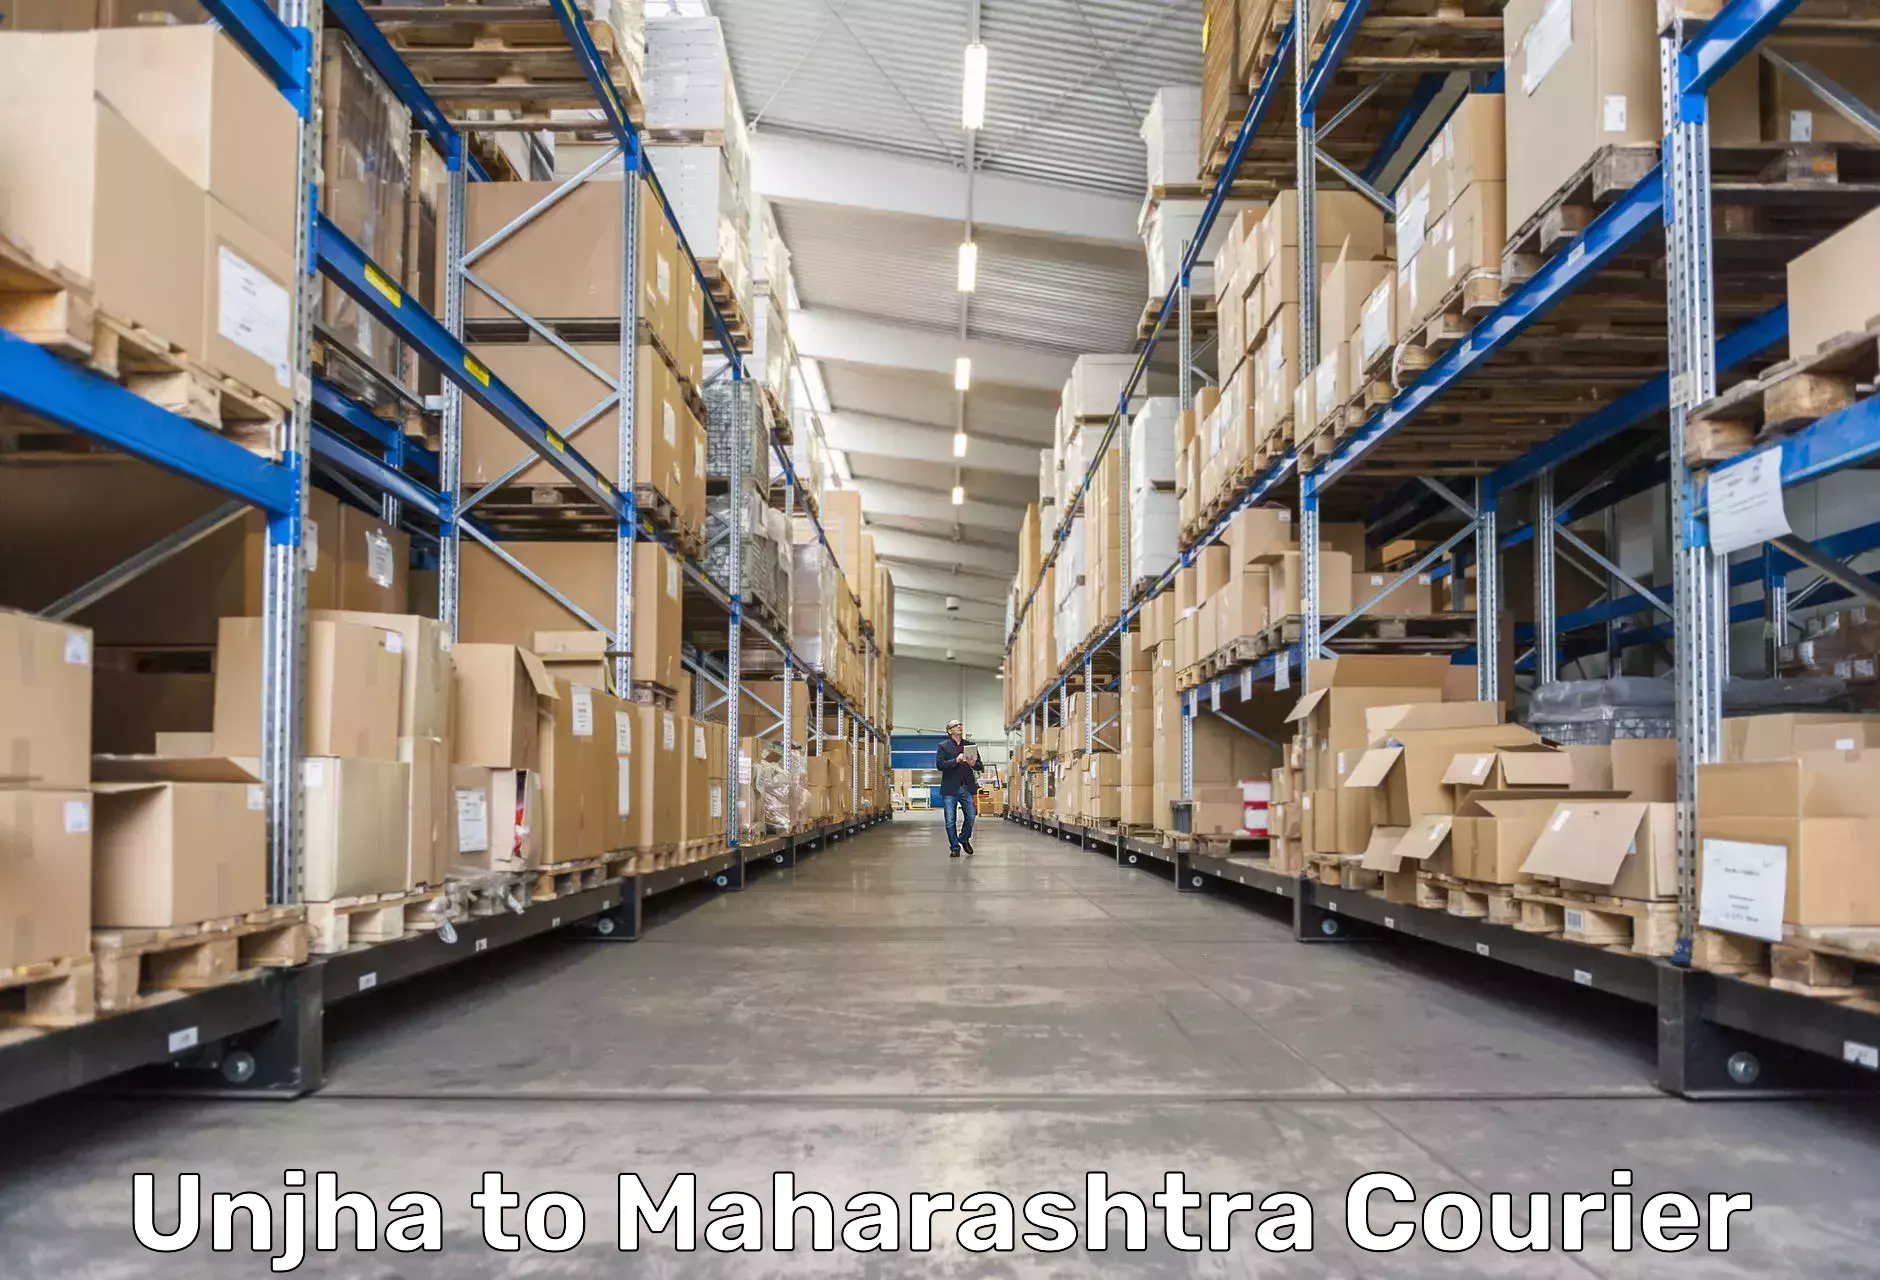 Flexible delivery scheduling Unjha to Loha Nanded